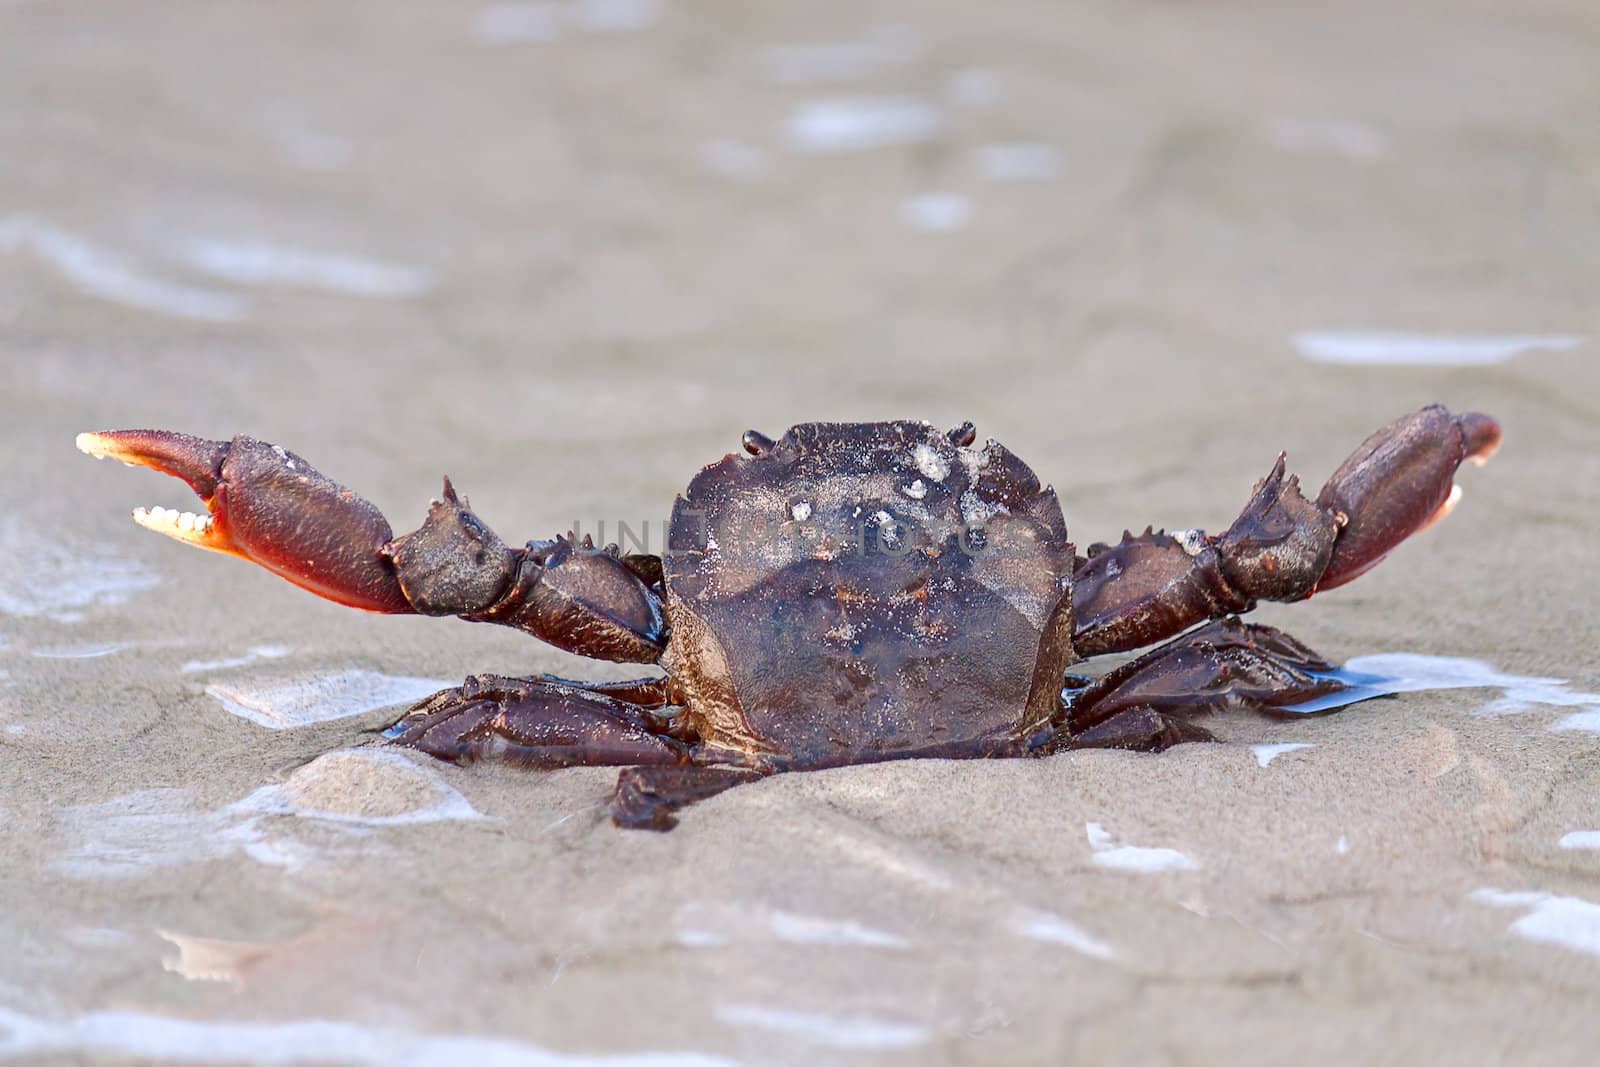 Crab in  awesome position in  sand, Thailand.